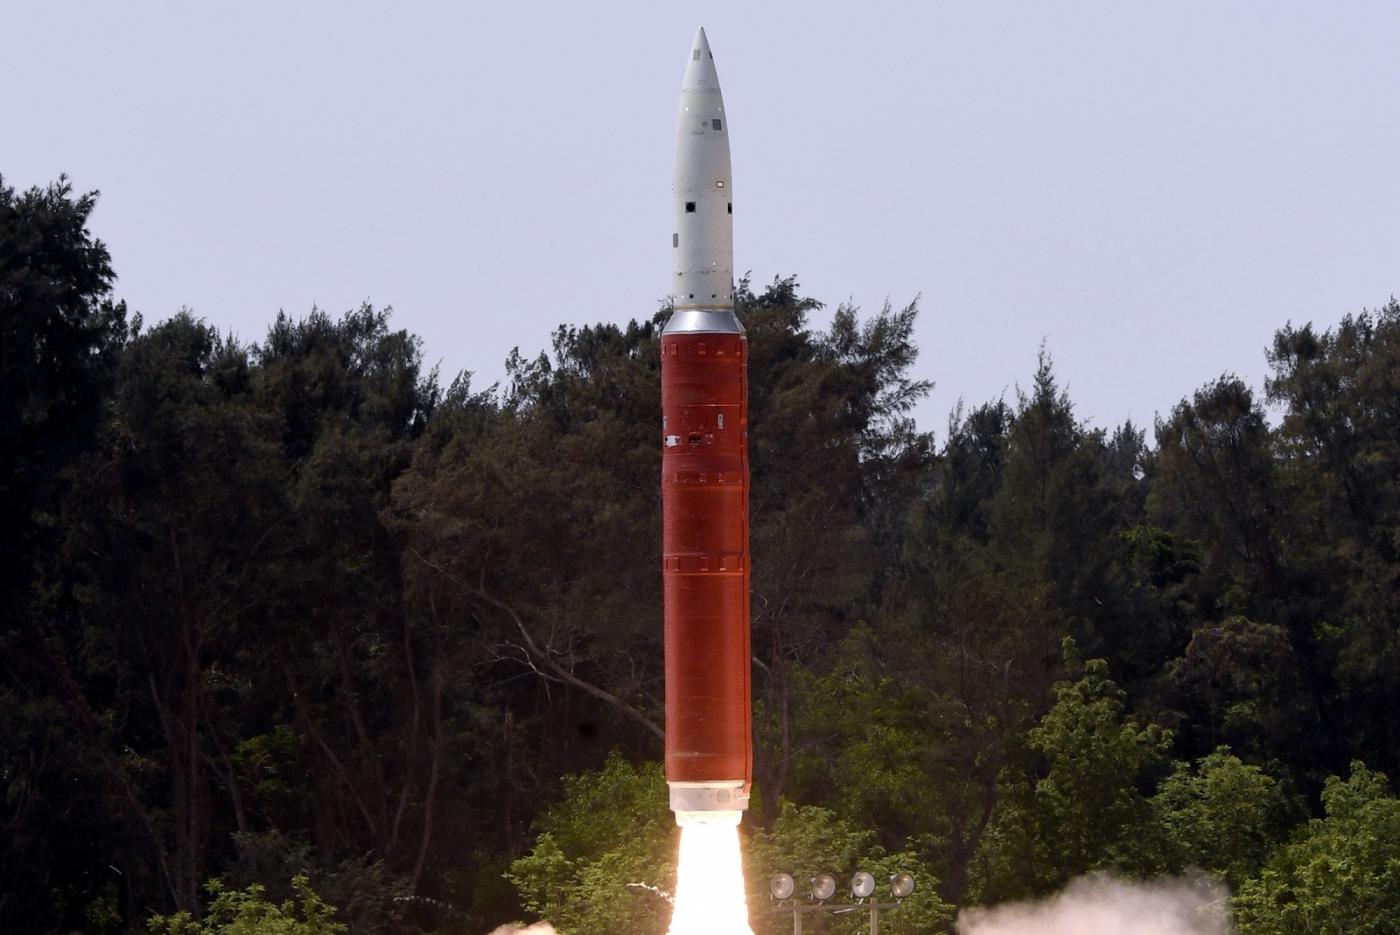 Odisha: Defence Research and Development Organisation (DRDO) successfully launched the Ballistic Missile Defence (BMD) Interceptor missile, in an Anti-Satellite (A-SAT) missile test 'Mission Shakti' engaging an Indian orbiting target satellite in Low Earth Orbit (LEO) in a 'Hit to Kill' mode from the Dr. A.P.J. Abdul Kalam Island, in Odisha on March 27, 2019. (Photo: IANS/PIB) by .